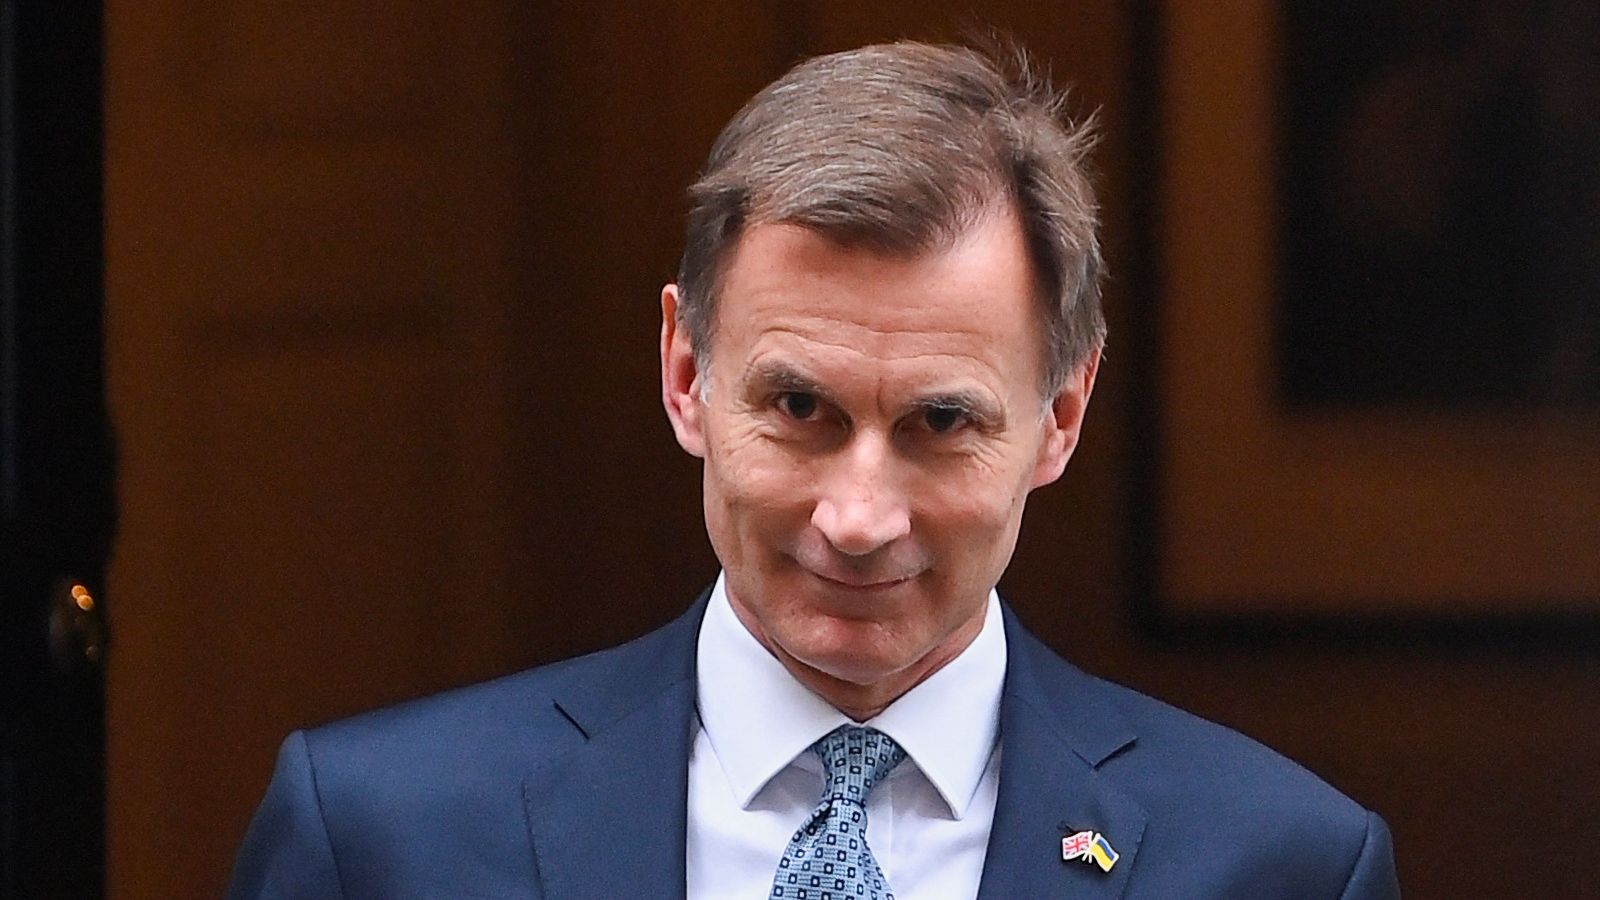 Jeremy Hunt defends speed of his childcare budget giveaway as 'biggest transformation in my lifetime'